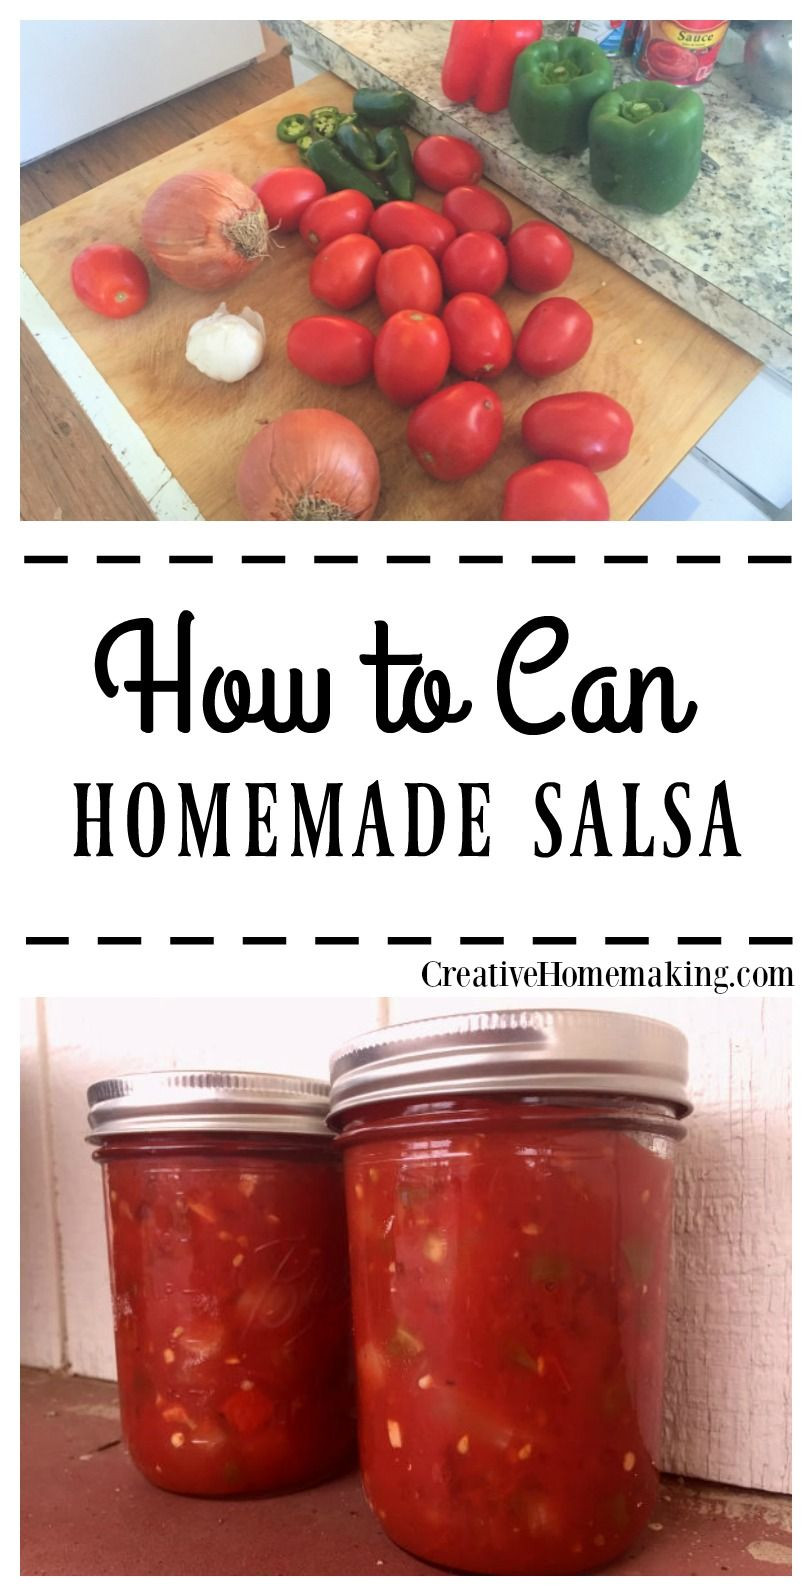 Homemade Salsa Recipe For Canning
 Best Salsa Recipe for Canning